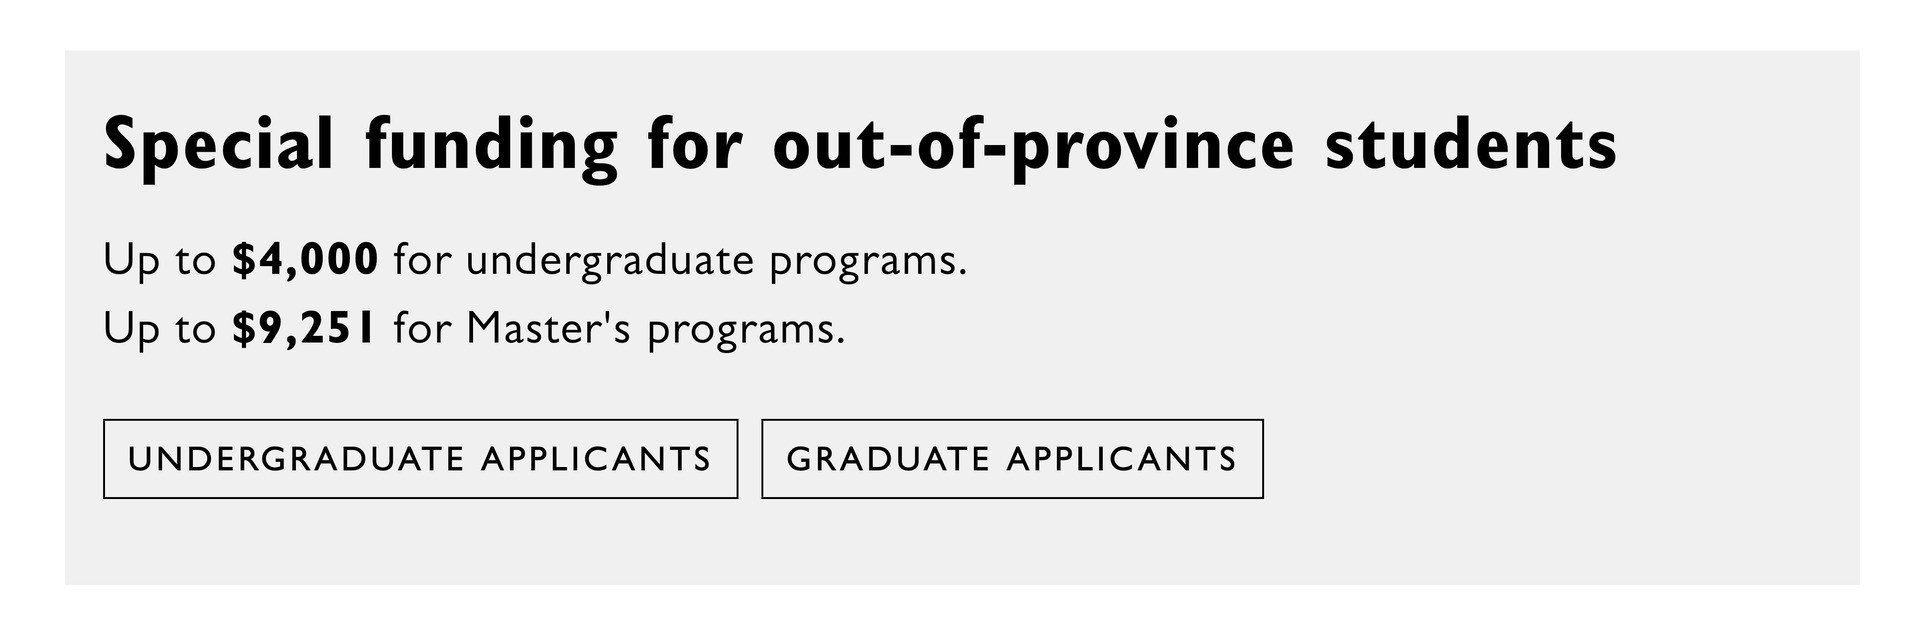 Screenshot showing a grey box announcing amounts of special funding for out-of-province students